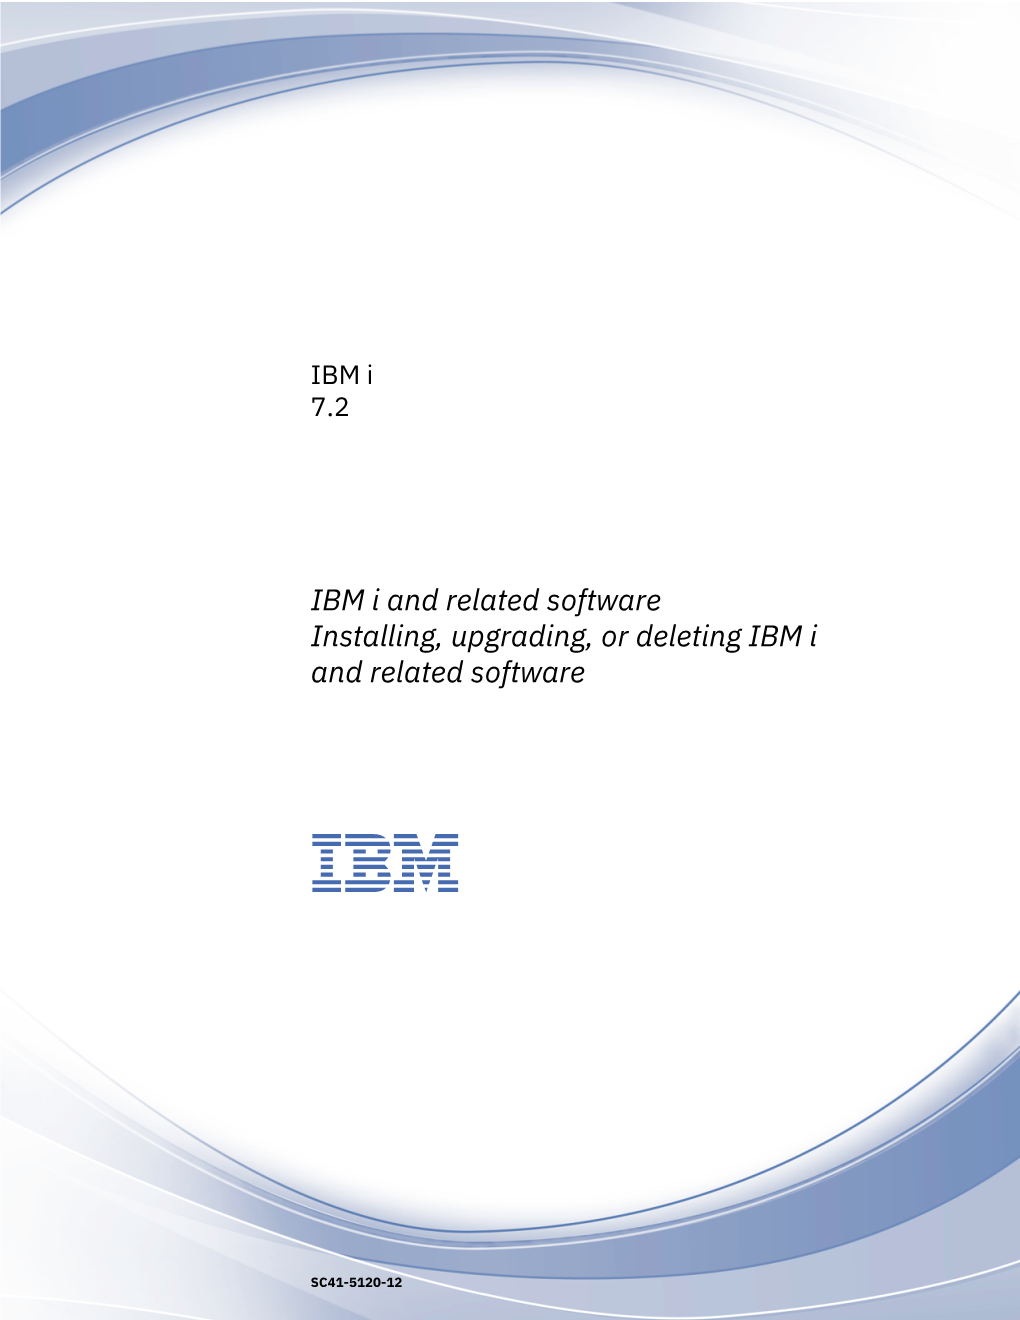 IBM I and Related Software Installing, Upgrading, Or Deleting IBM I and Related Software